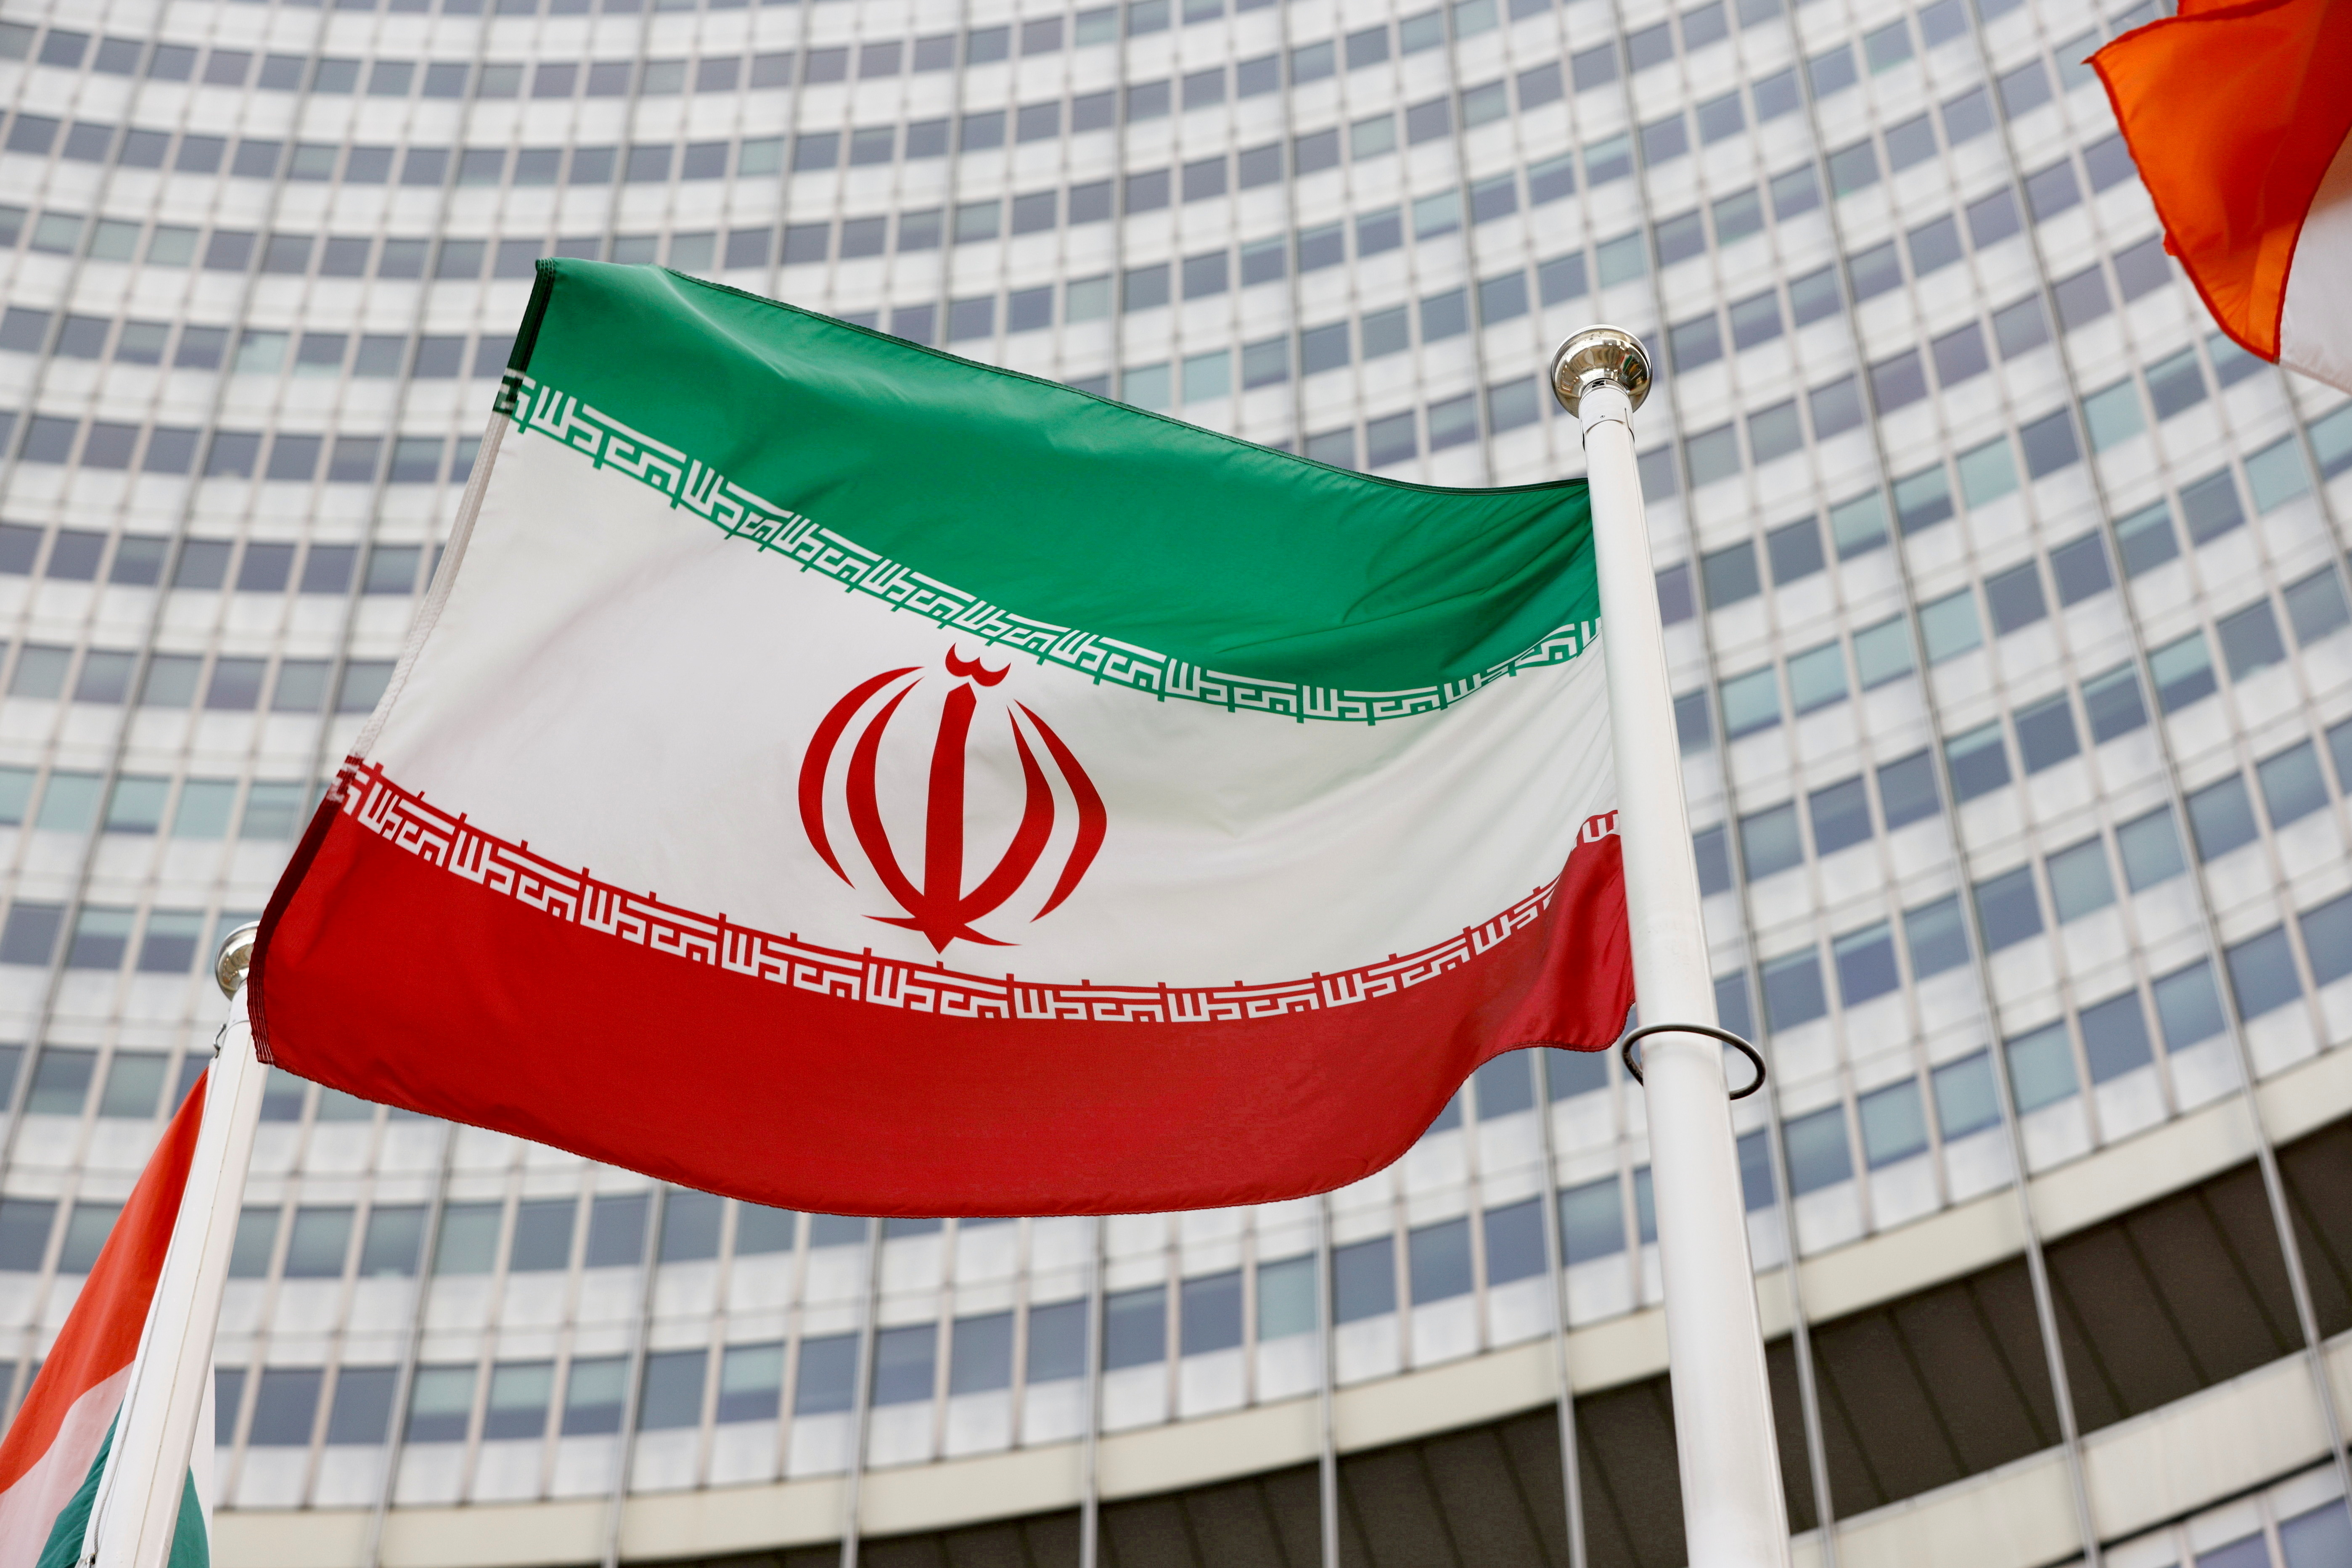 The Iranian flag waves in front of the International Atomic Energy Agency (IAEA) headquarters in Vienna, Austria May 23, 2021. REUTERS/Leonhard Foeger